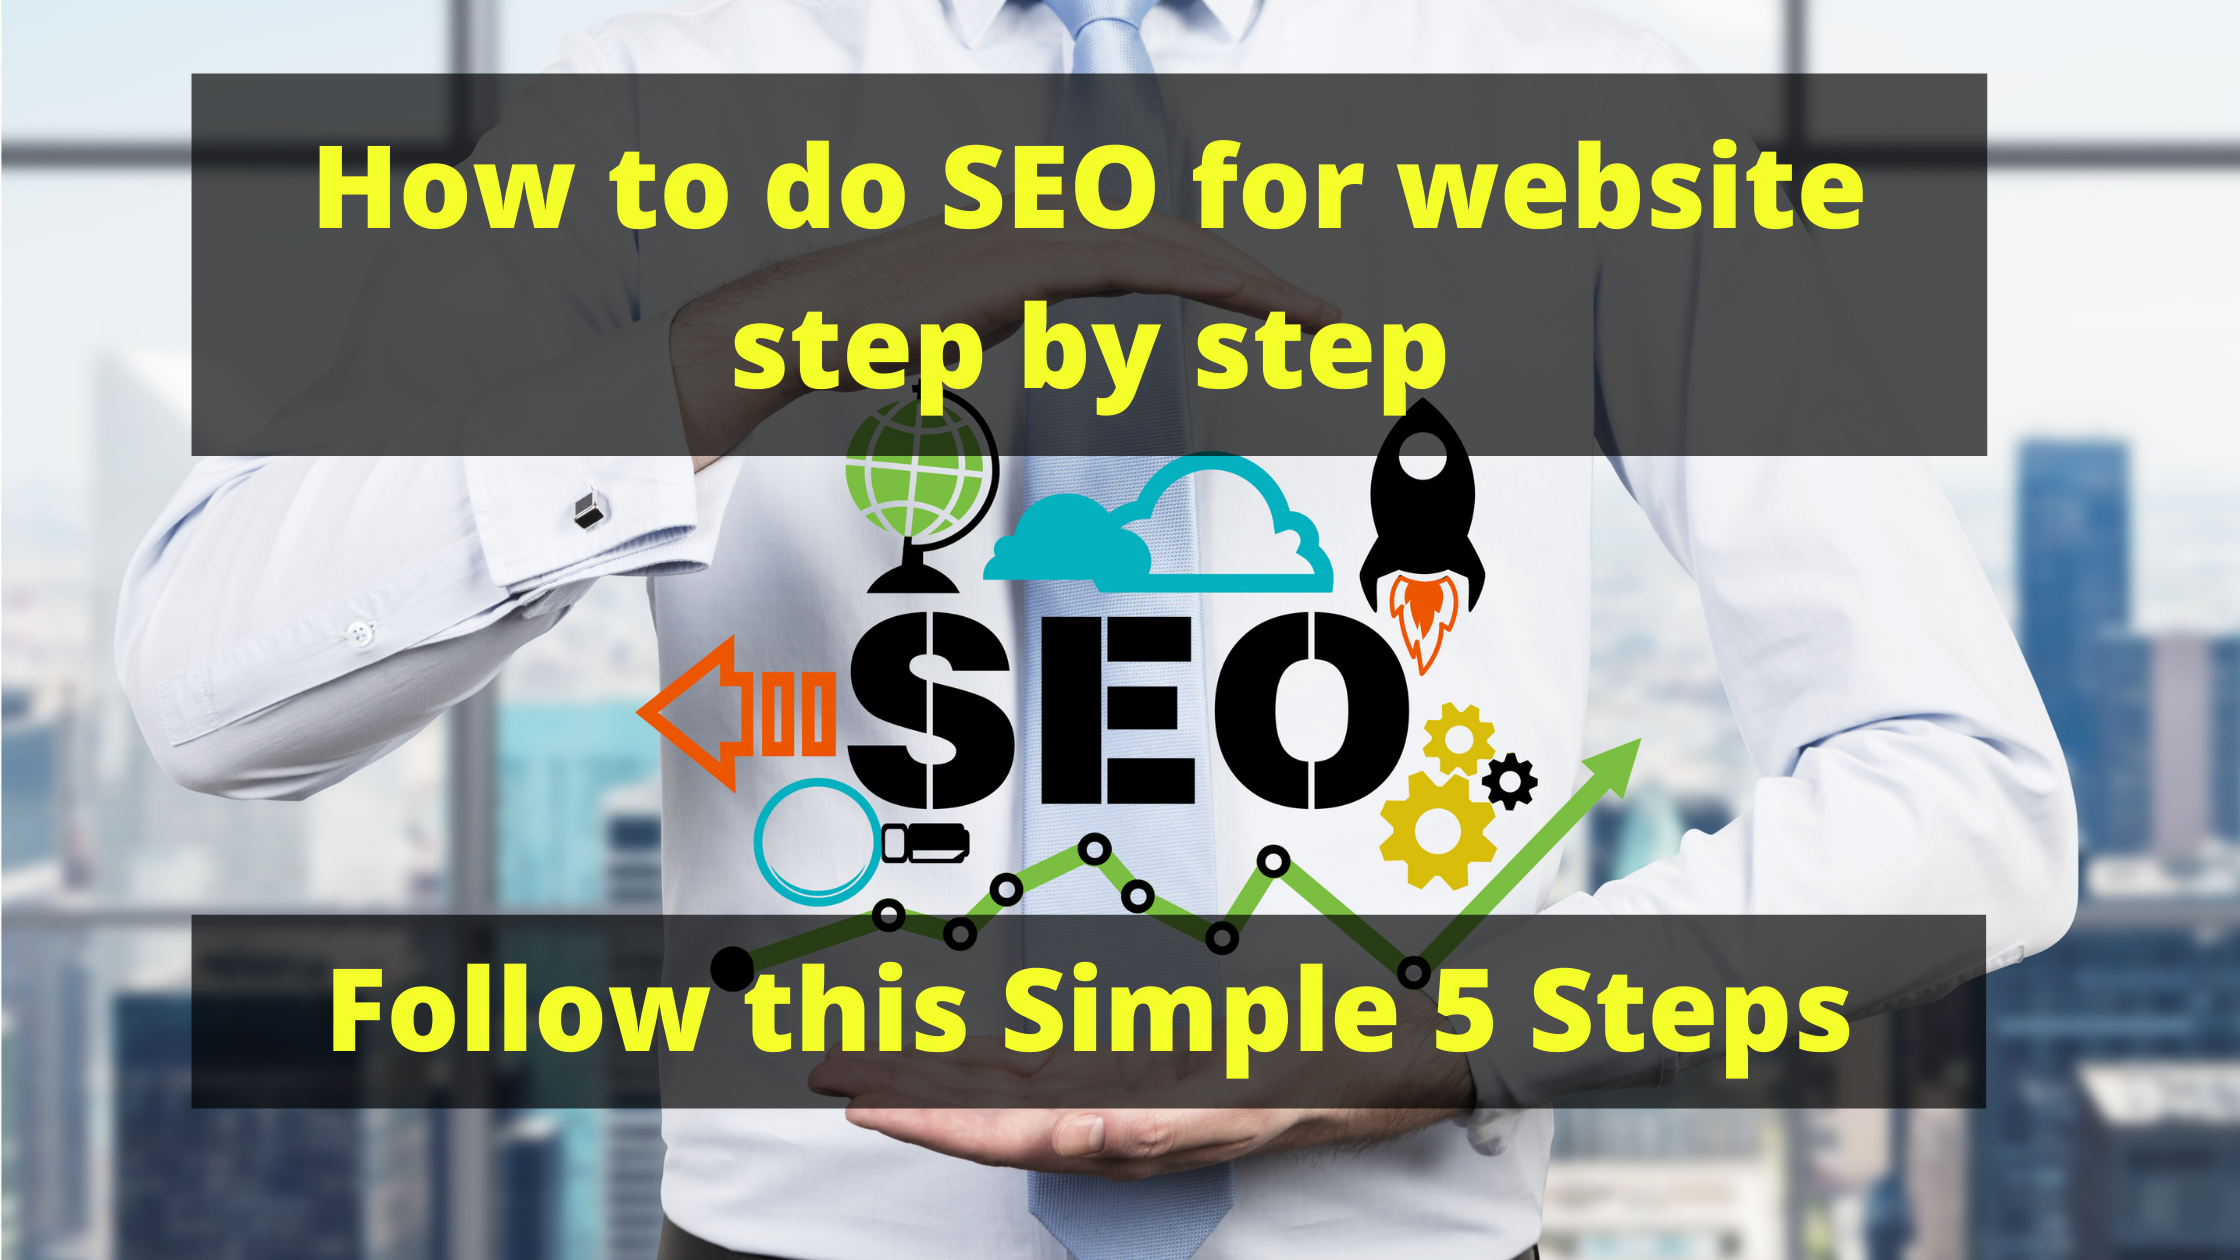 How to do SEO for website step by step